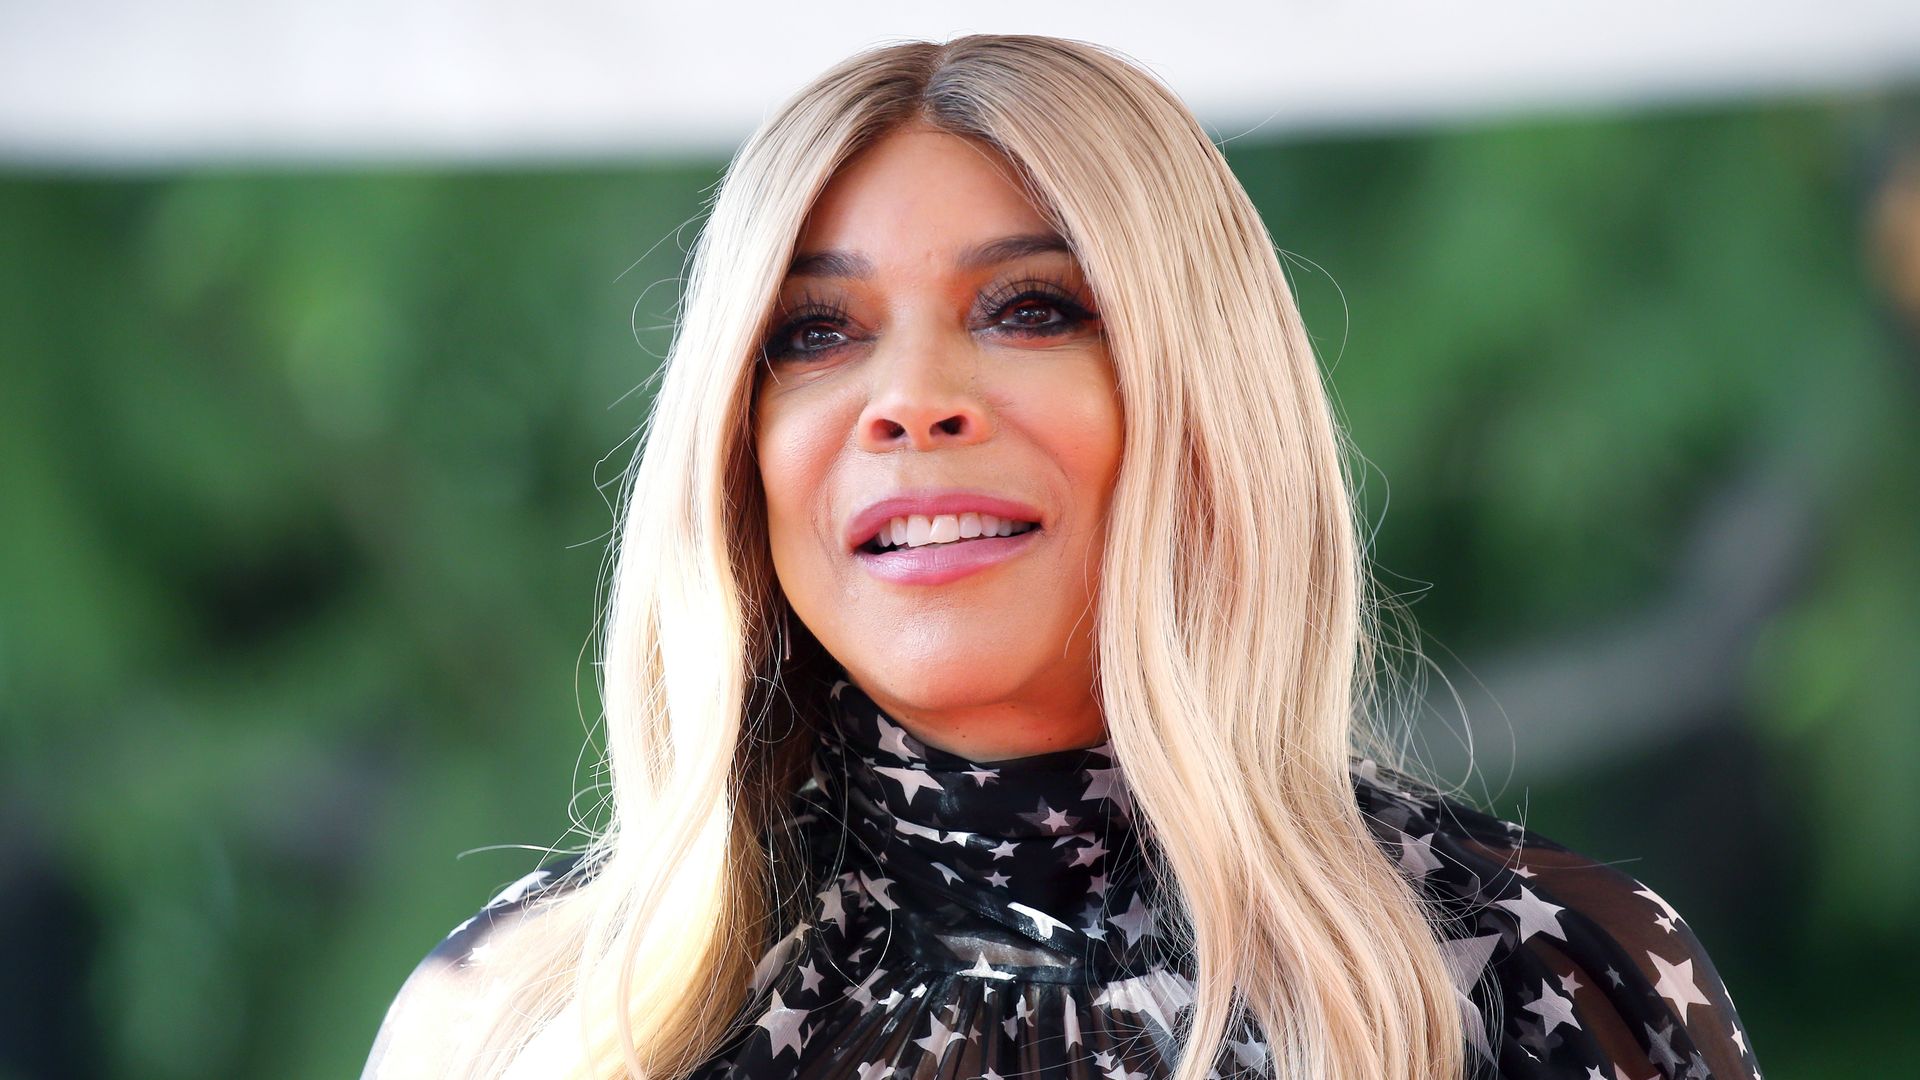 All about Wendy Williams' health issues, finances, guardianship and family life